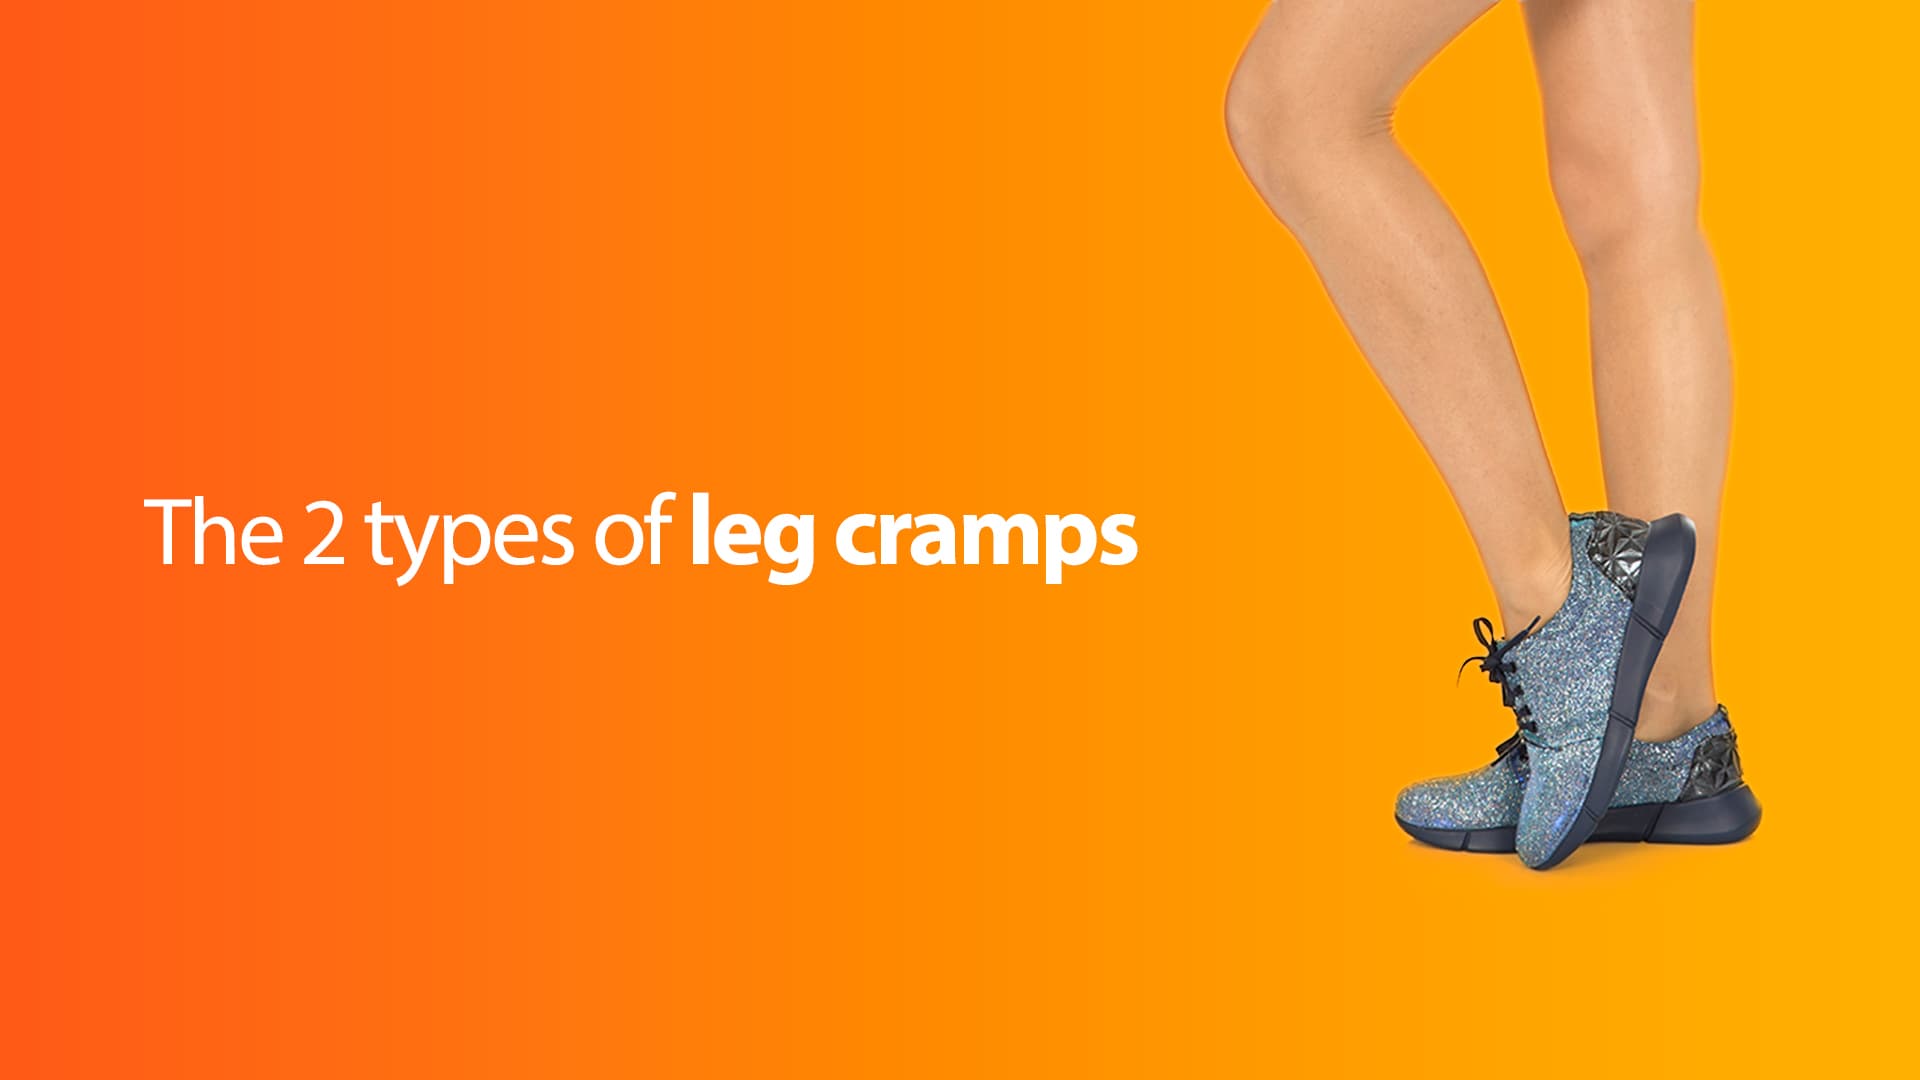 Did you know there are two types of leg cramps?